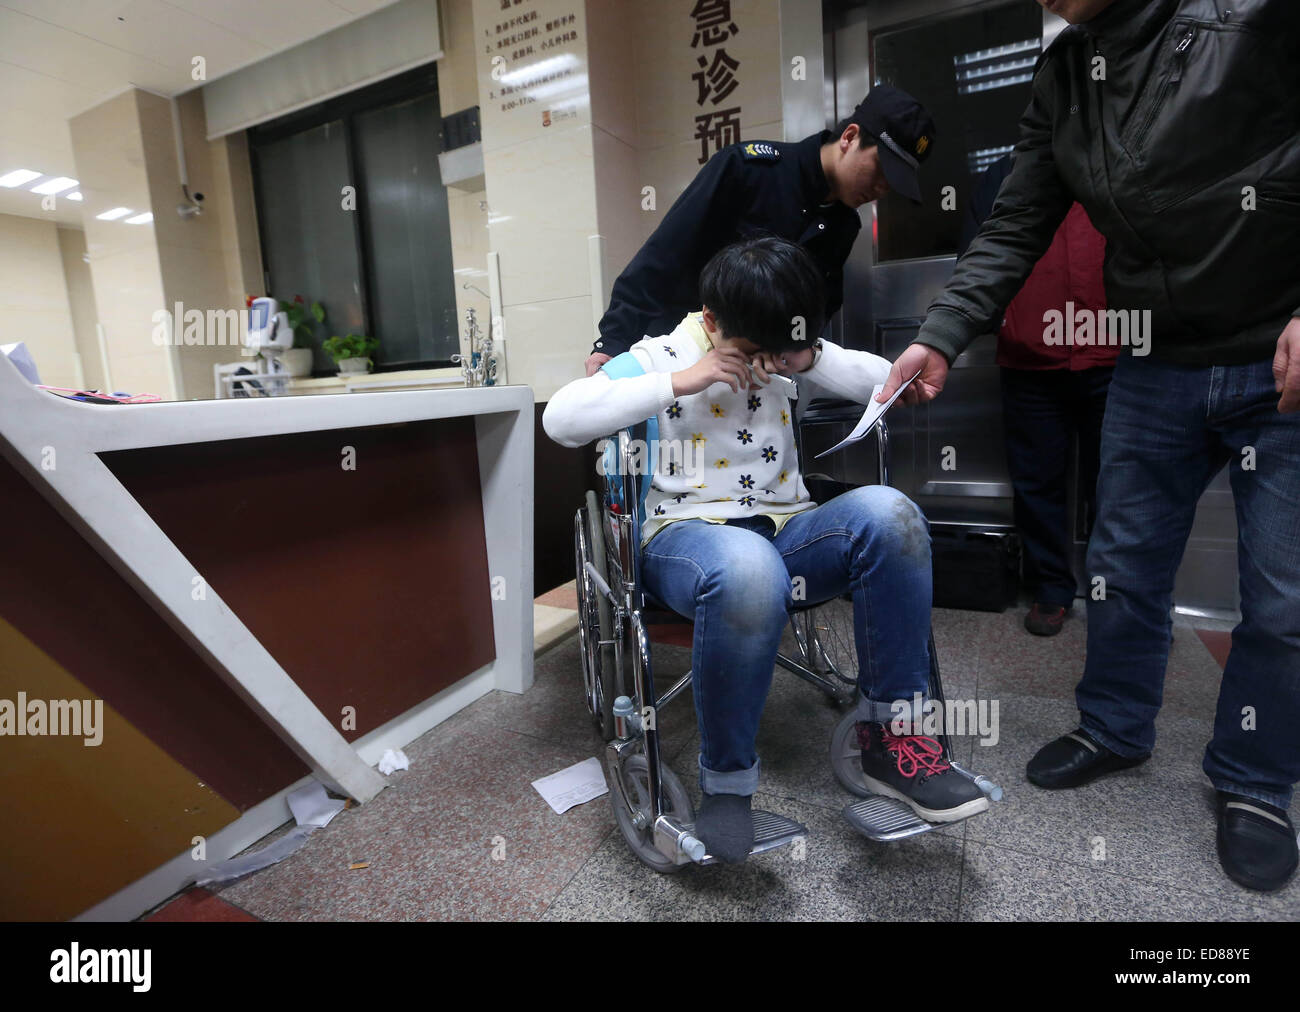 Shanghai, China. 1st Jan, 2015. An injured person is seen at a hospital in Shanghai, east China, Jan. 1, 2015. New Year celebrations in Shanghai's bund area went astray Wednesday night as a stampede resulted in 36 people dead and 47 injured. The city has set up a working team for rescue operations and to deal with the aftermath. © Ding Ting/Xinhua/Alamy Live News Stock Photo